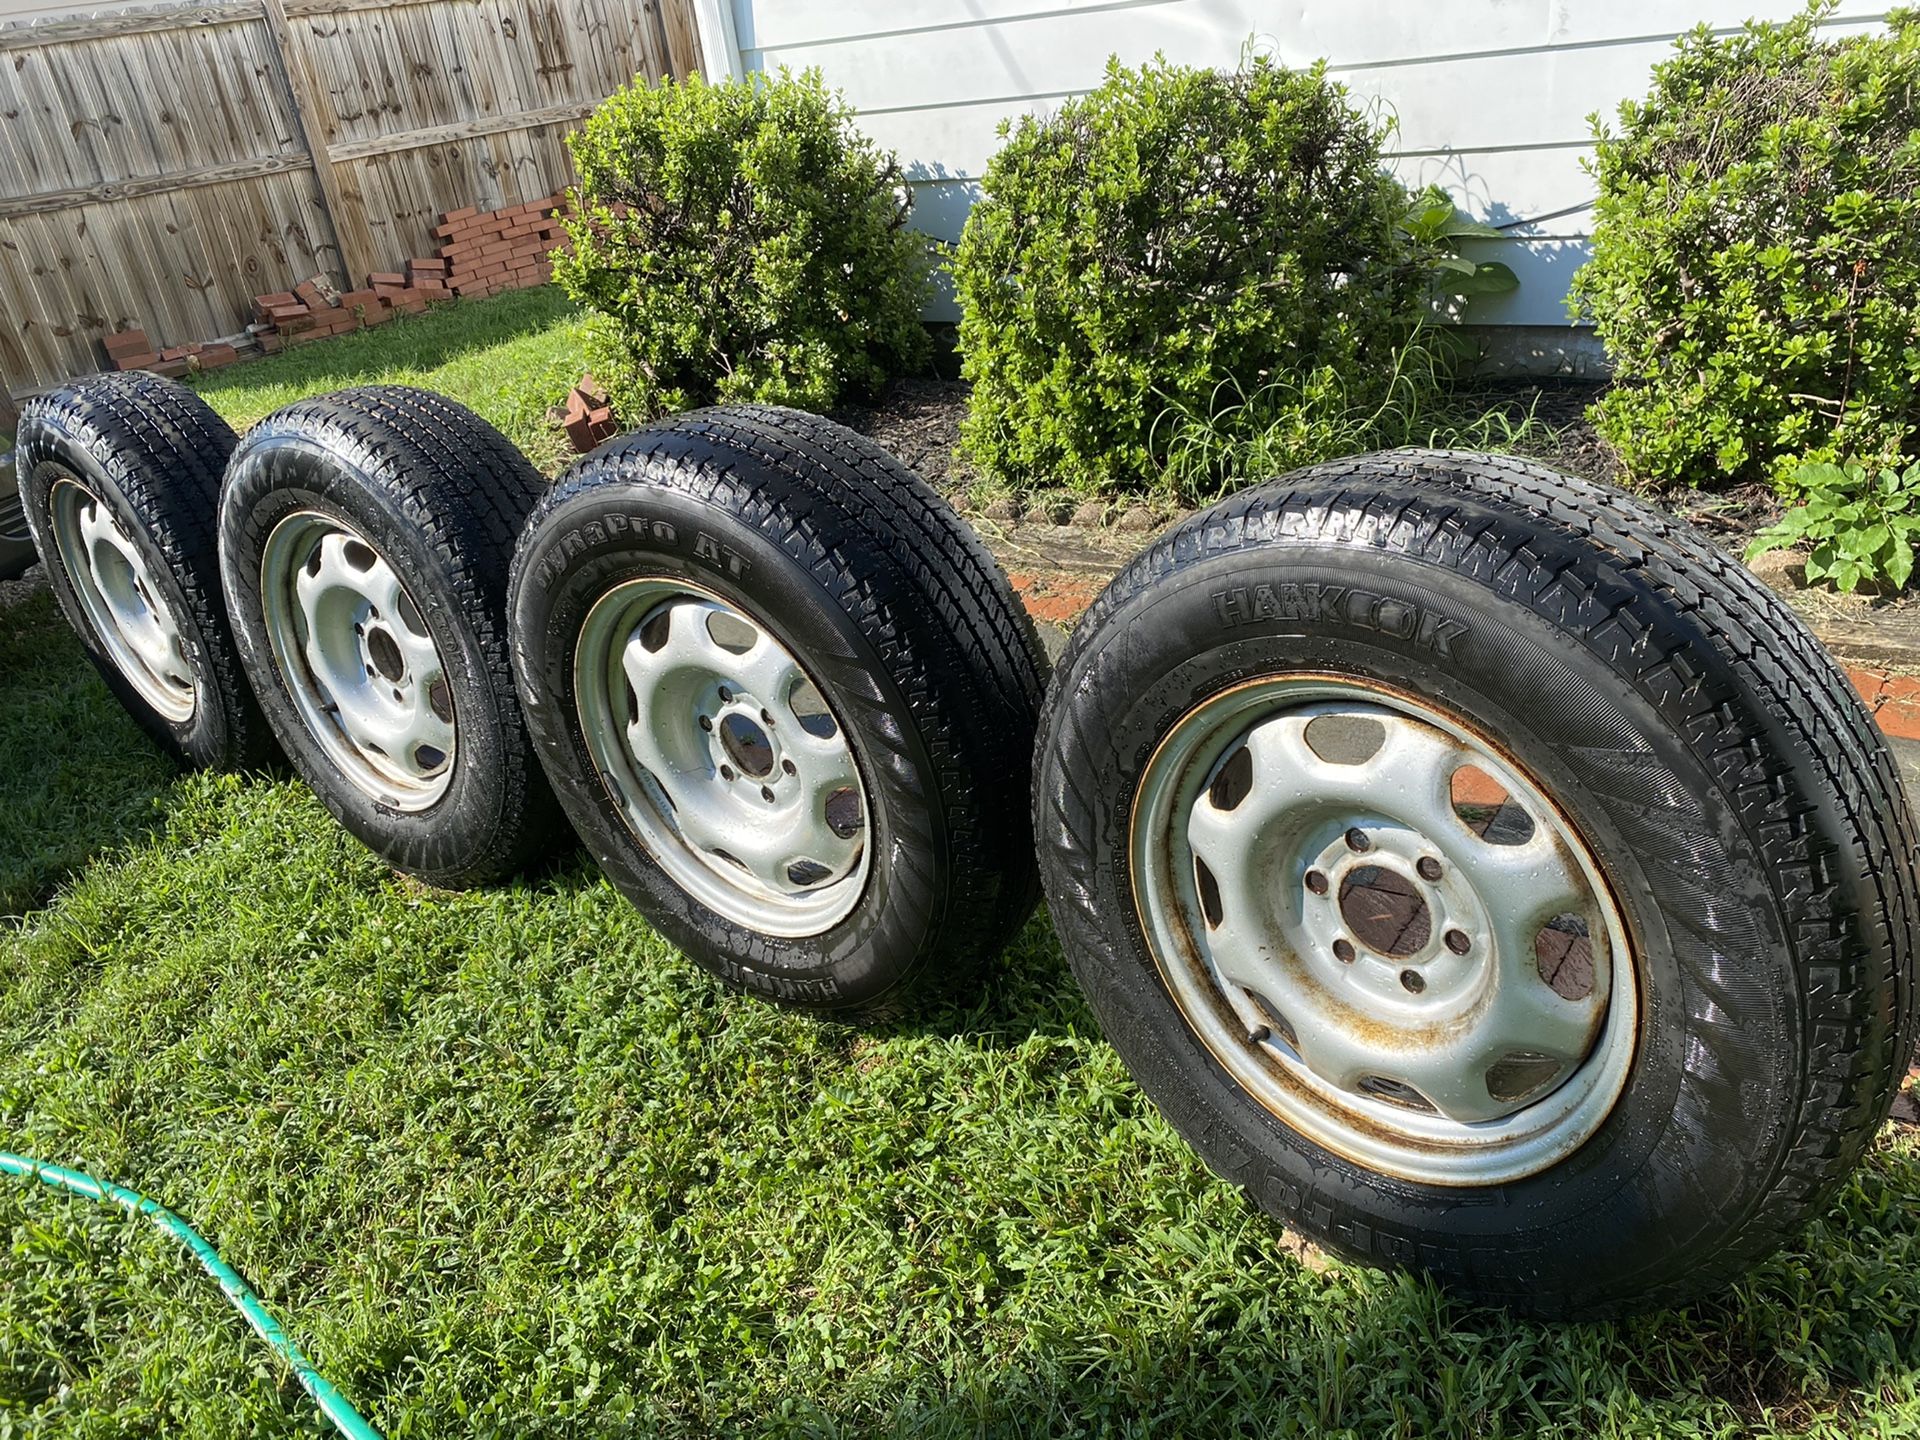 4 HANKOOk tires in very good condition